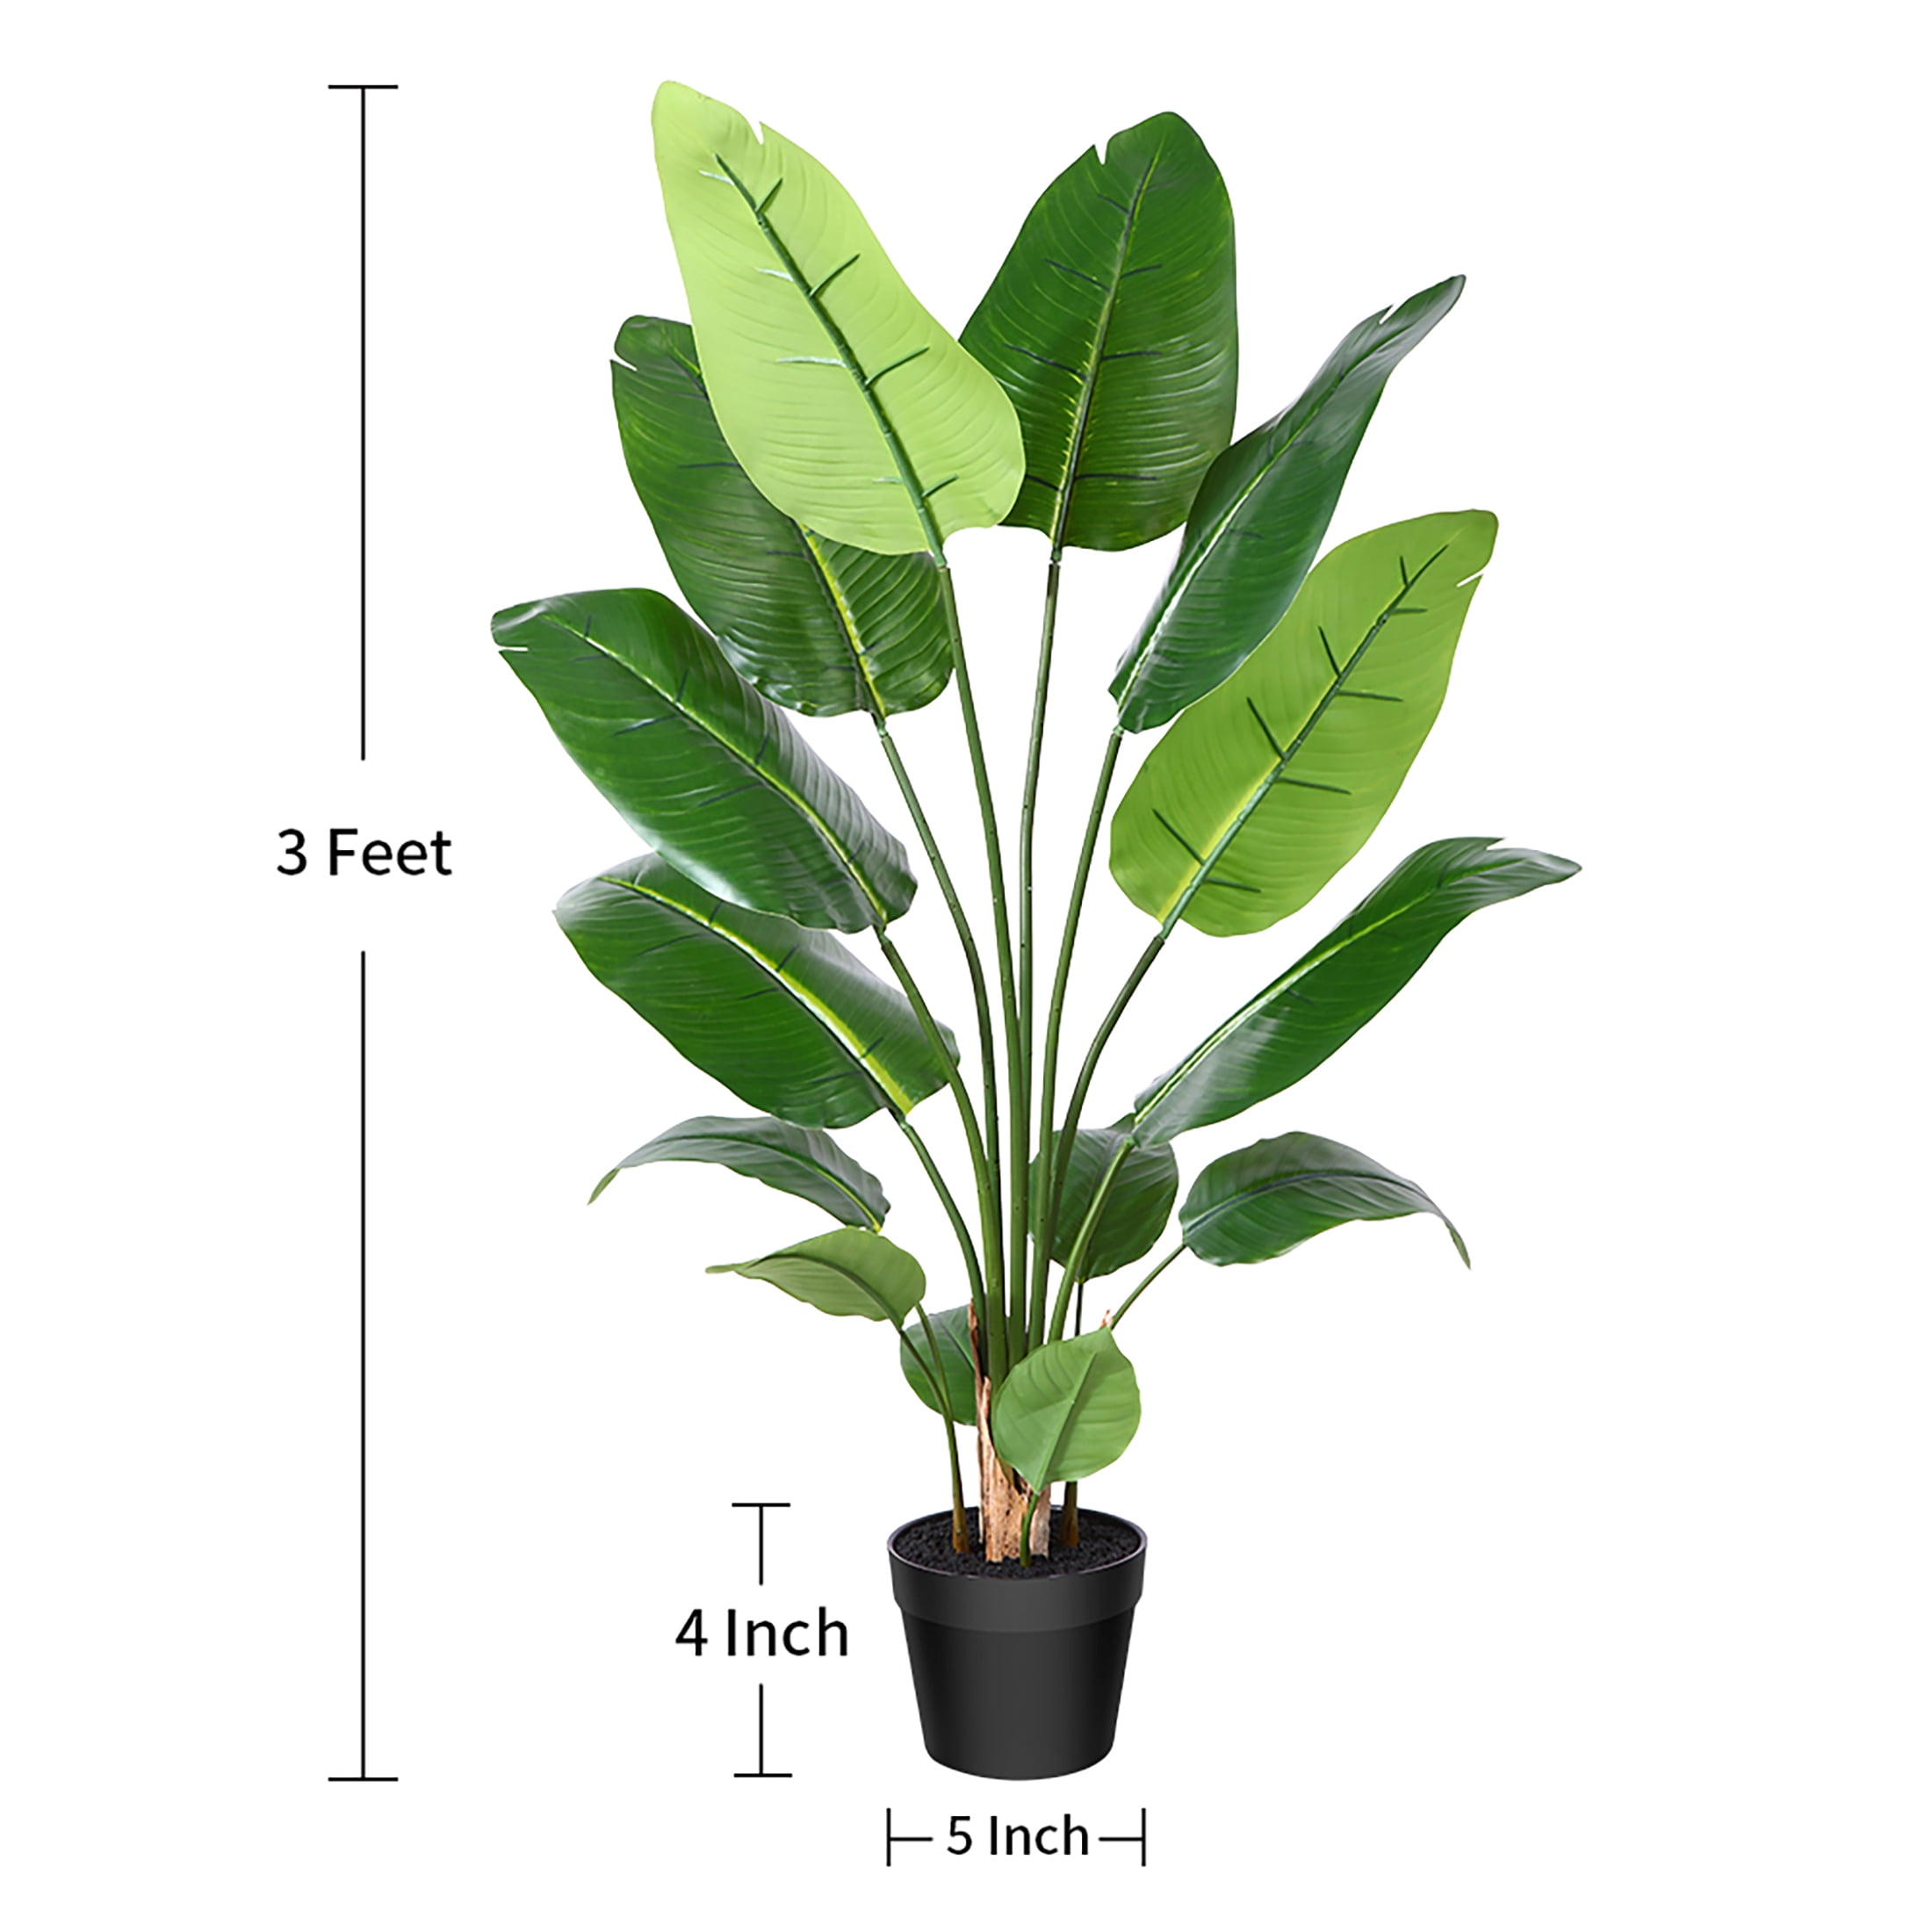 Indoor Green BIRDS OF PARADISE ARTIFICIAL PLANTS, For Decoration, Size: 1.8  Ft